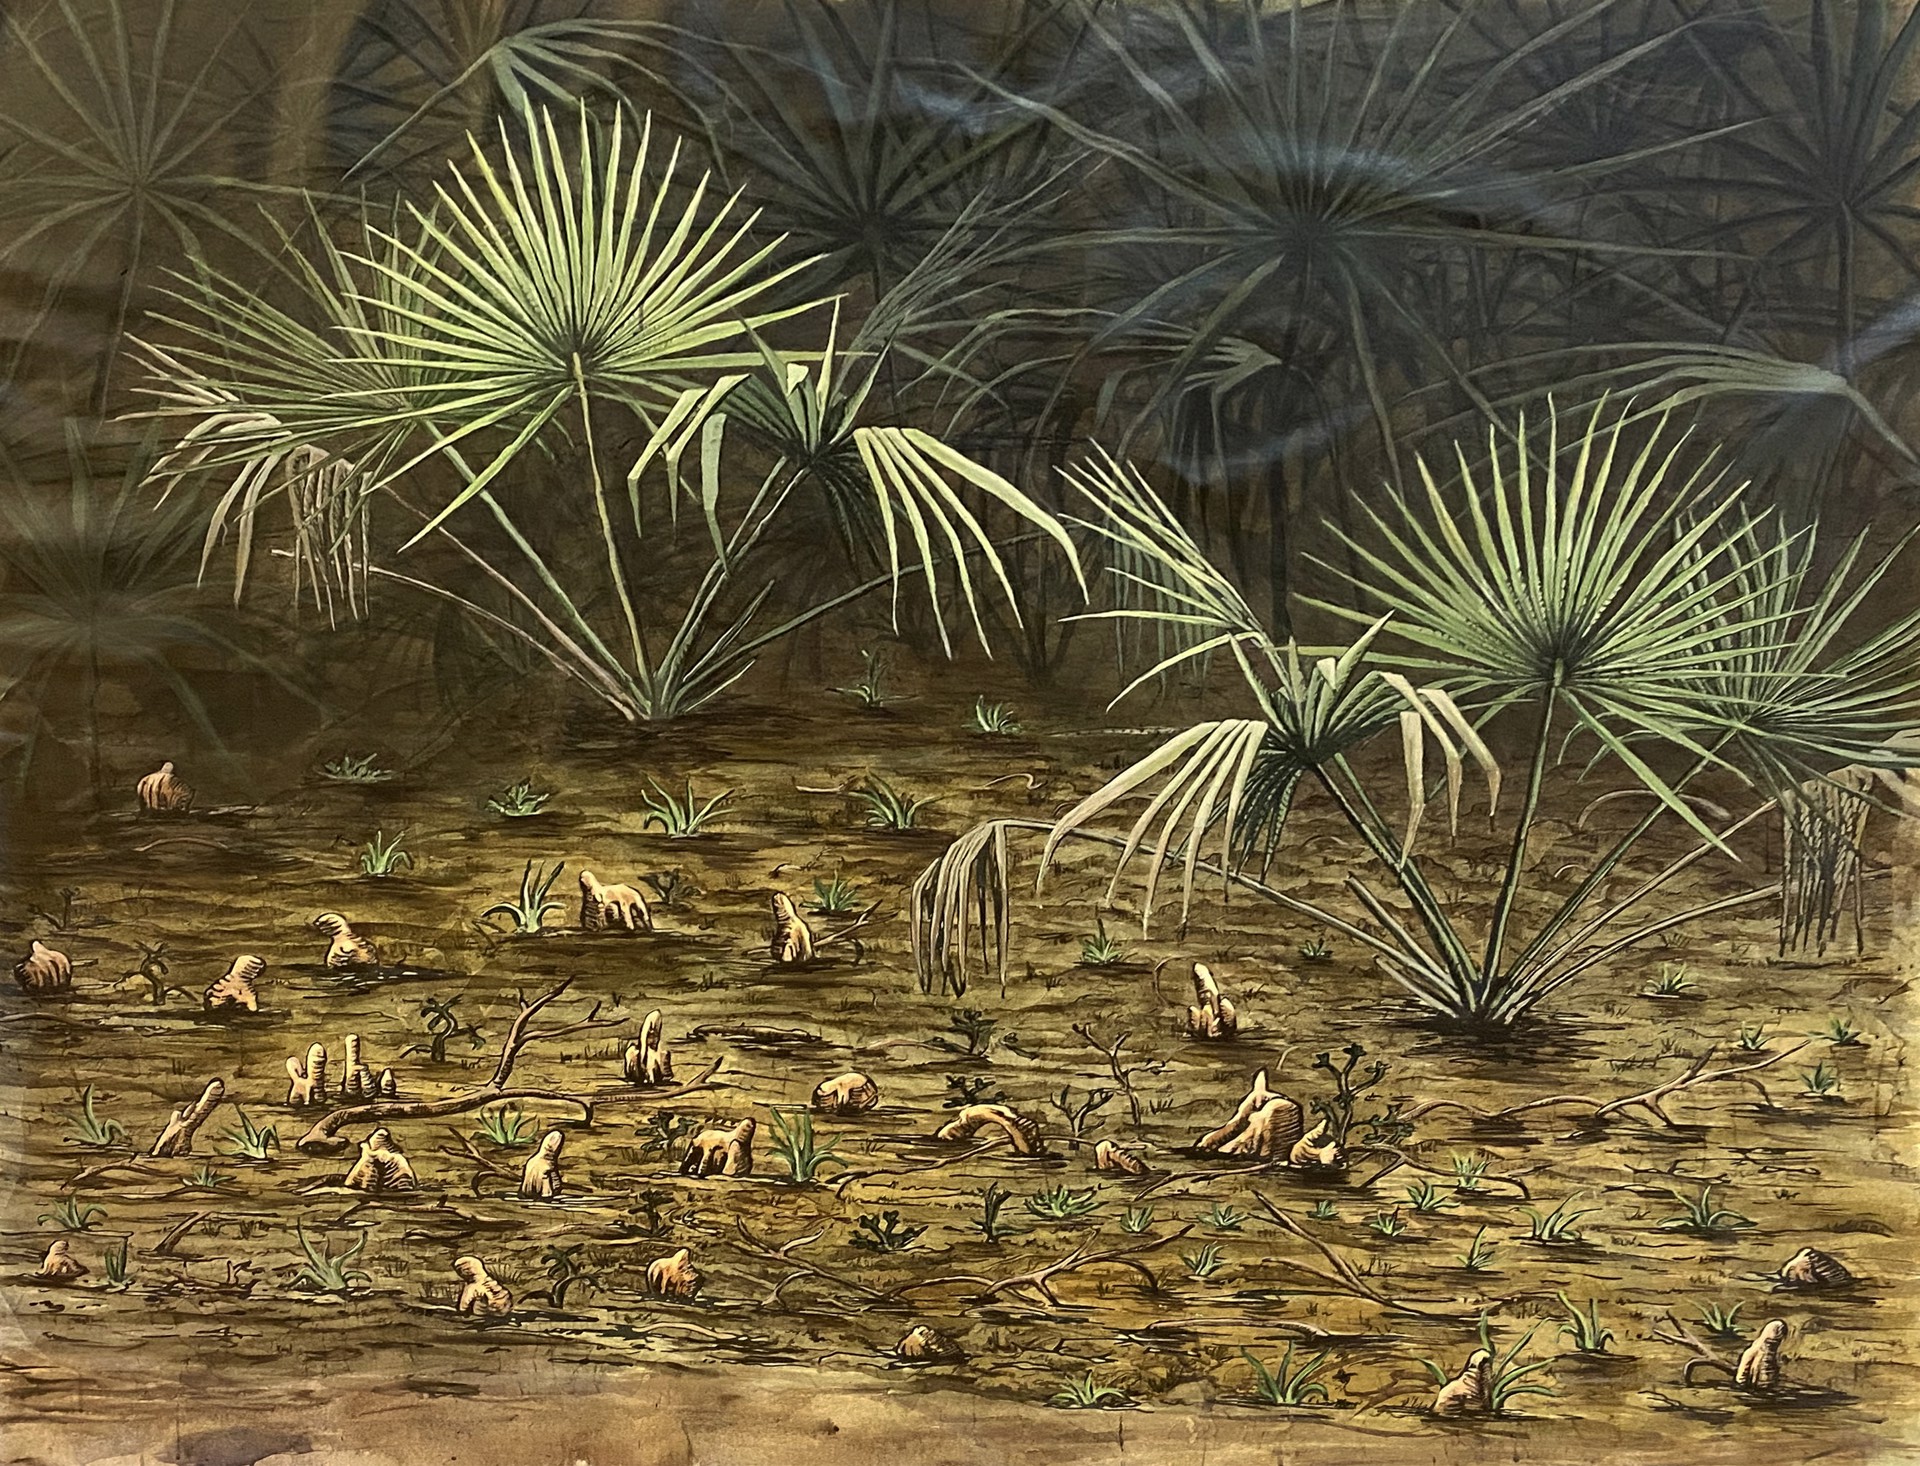 Palmetto by Pippin Frisbie-Calder